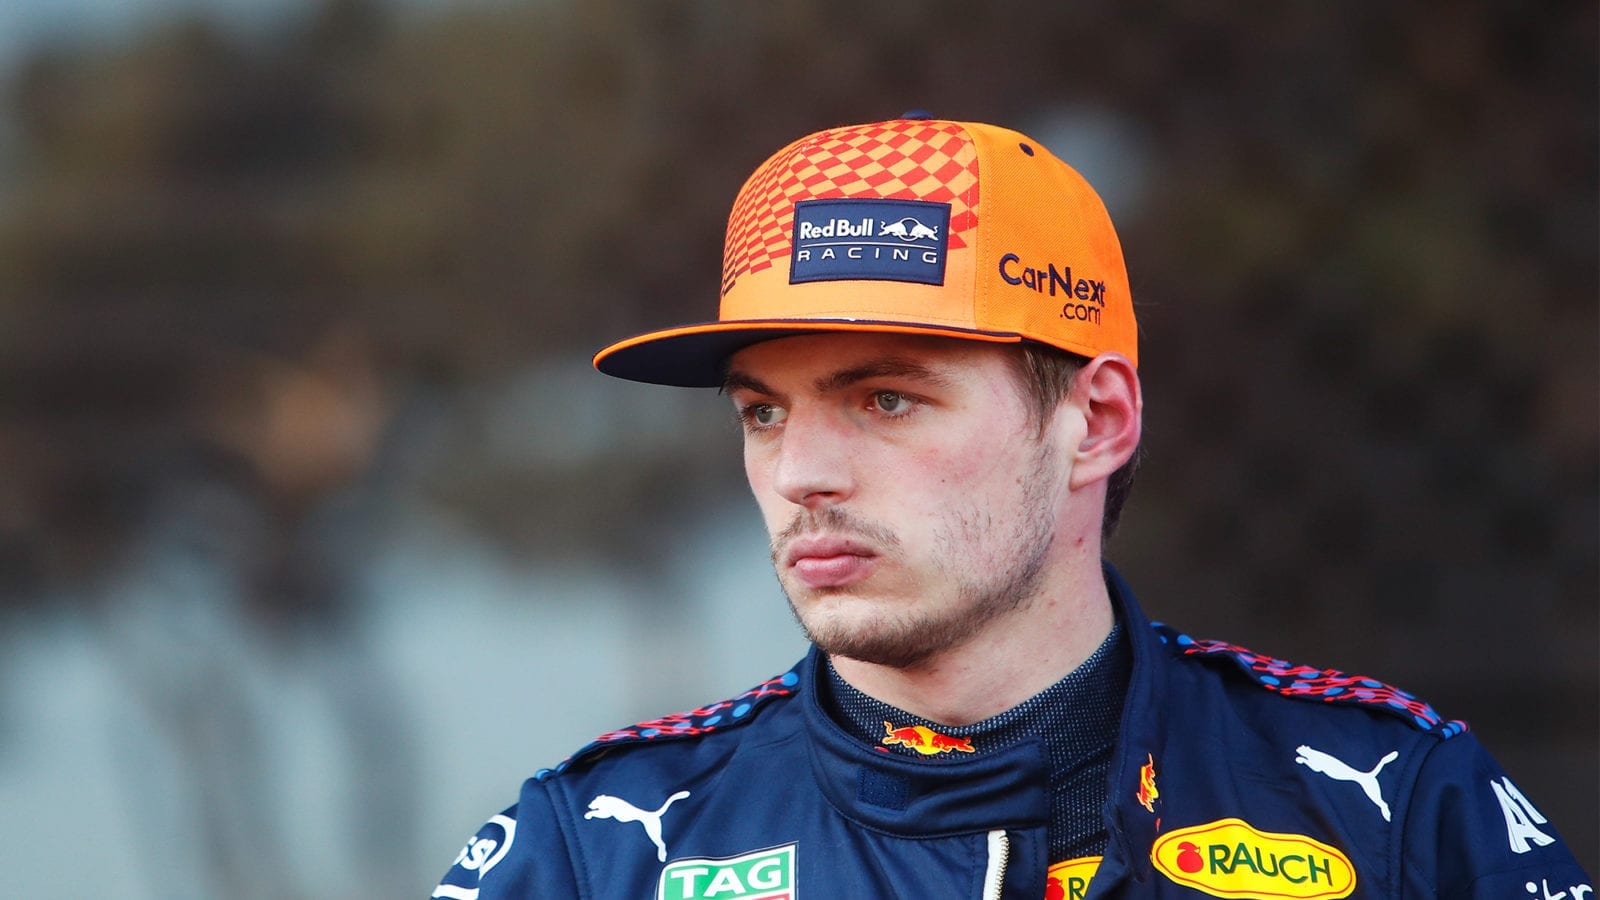 Max Verstappen after qualifying for the 2021 Azerbaijan Grand Prix